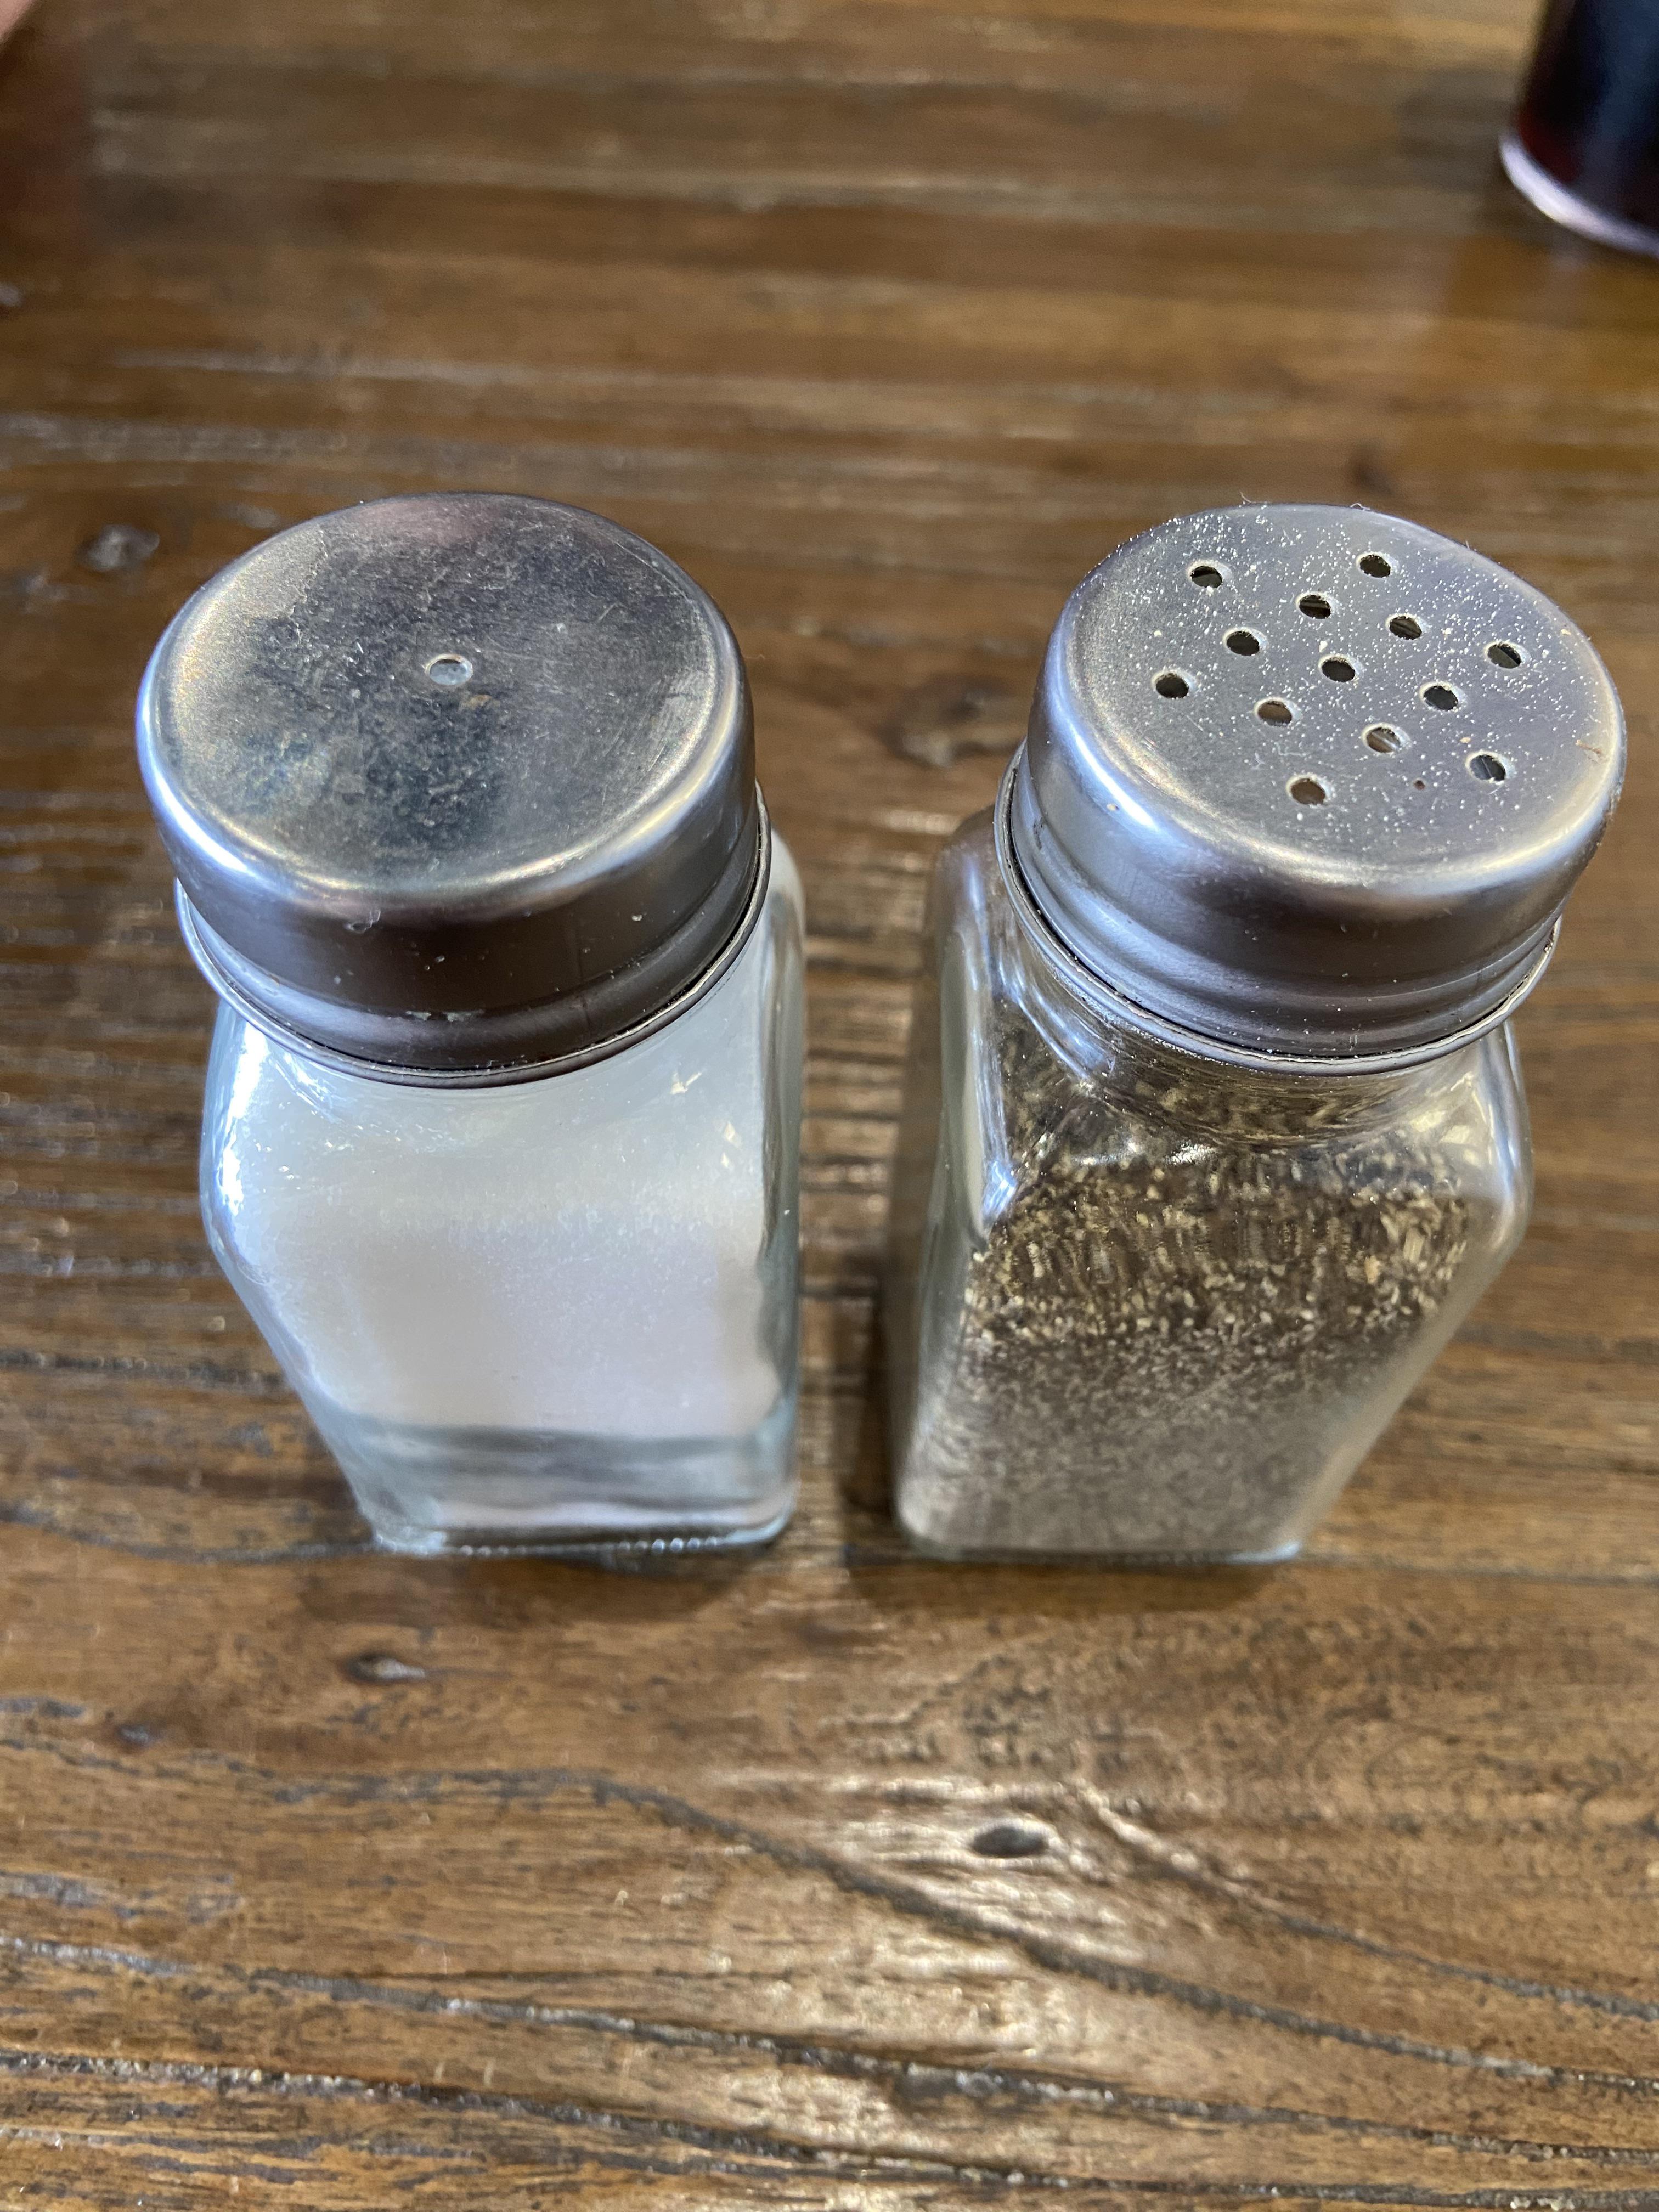 holes on salt and pepper shakers